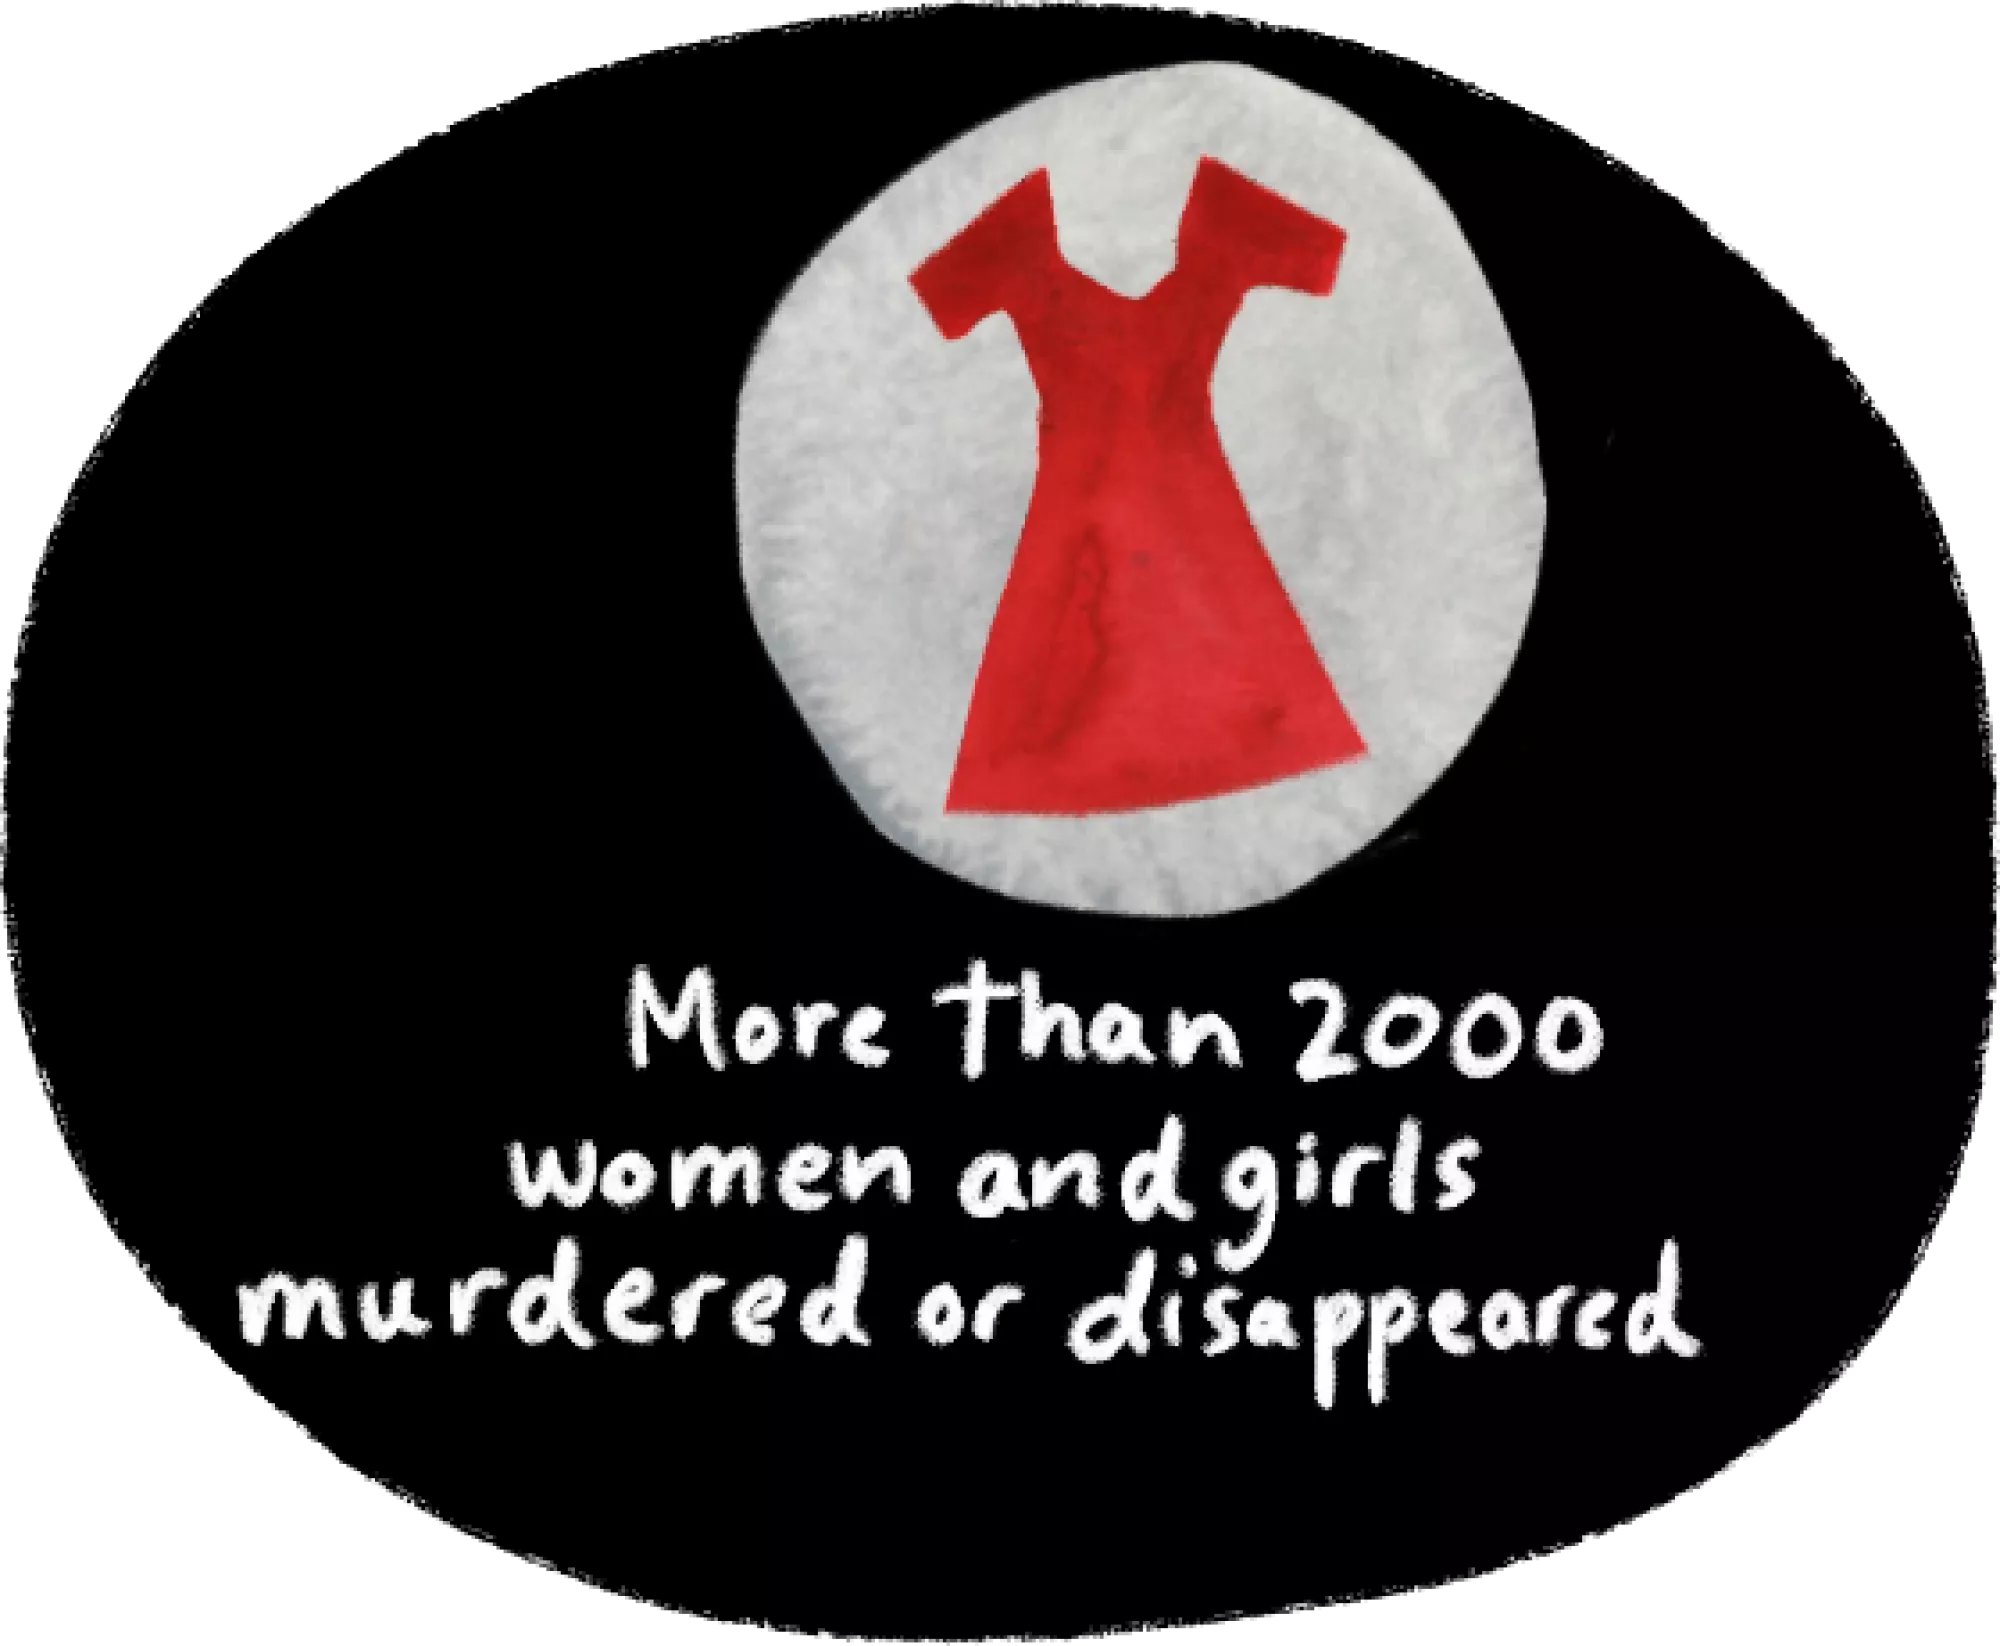 More than 2000 women and girls murdered or disappeared